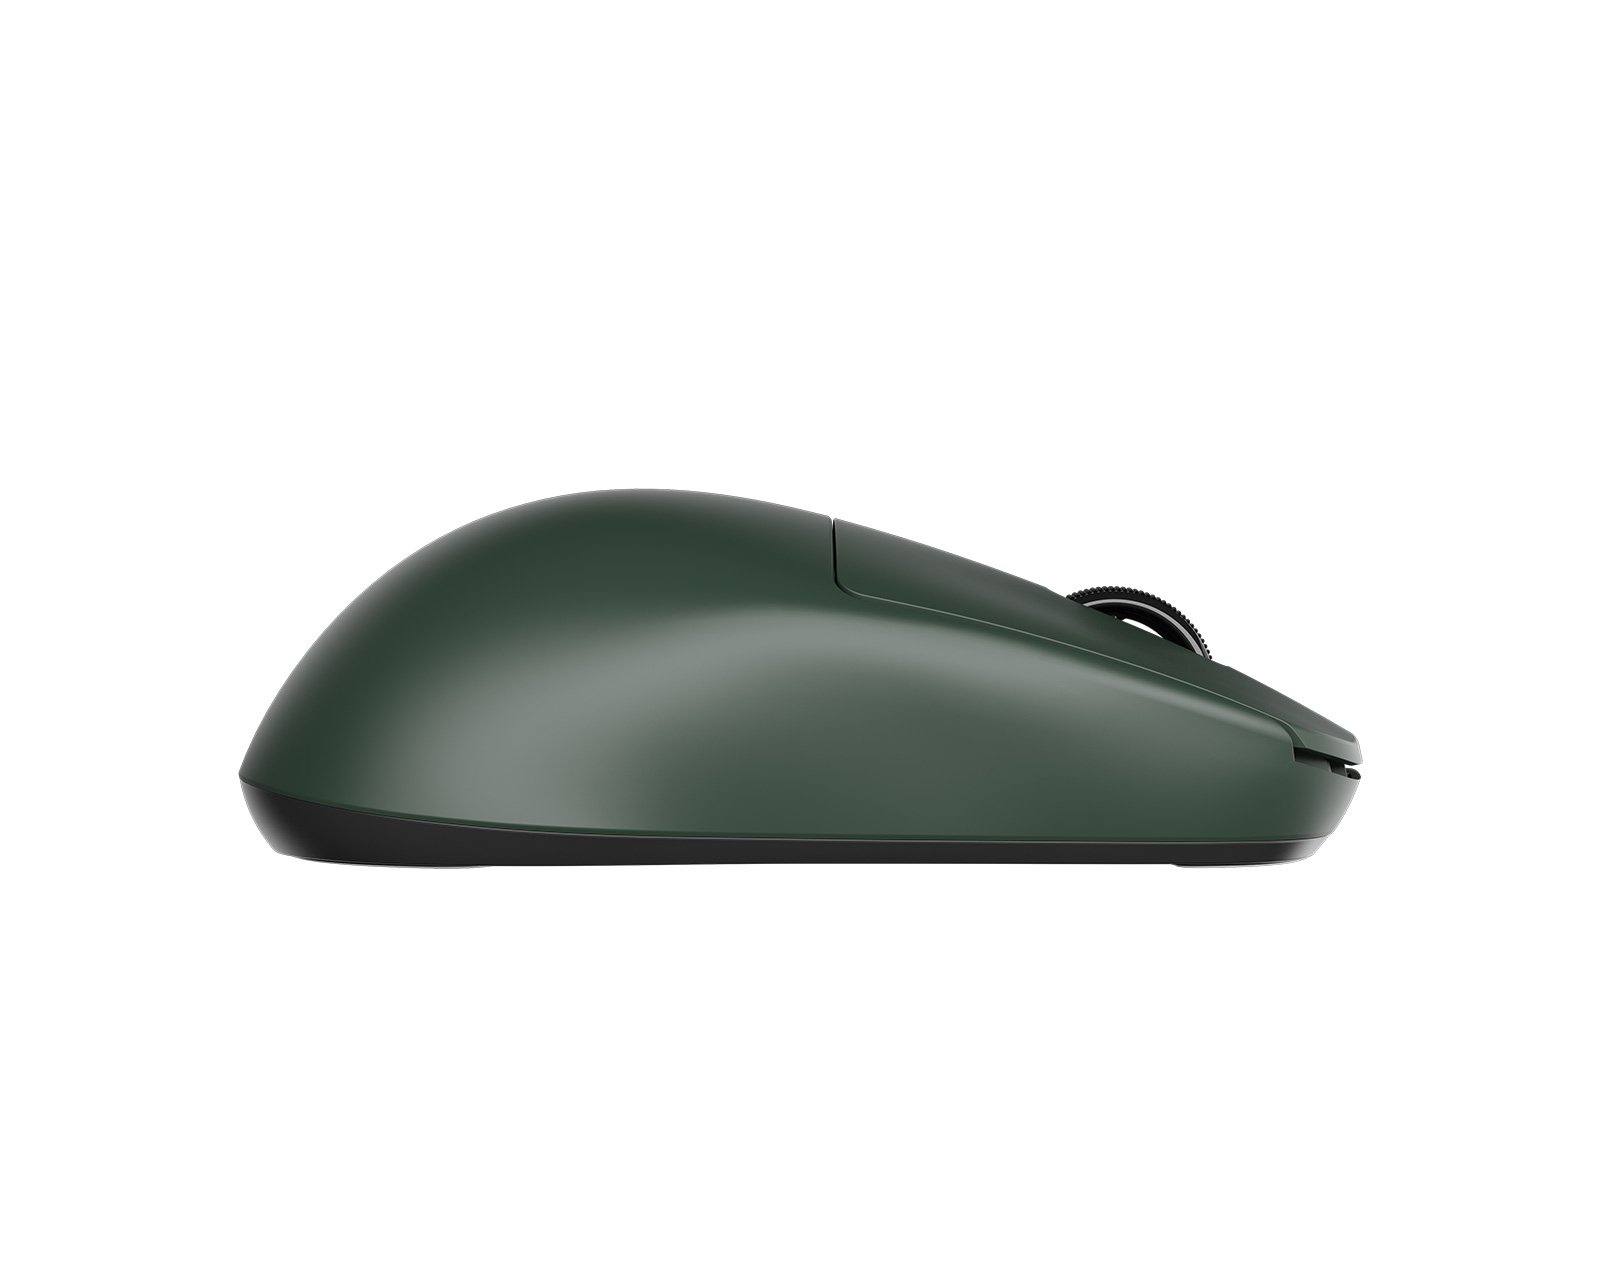 Pulsar X2-H High Hump 4K Wireless Gaming Mouse - Green- Limited